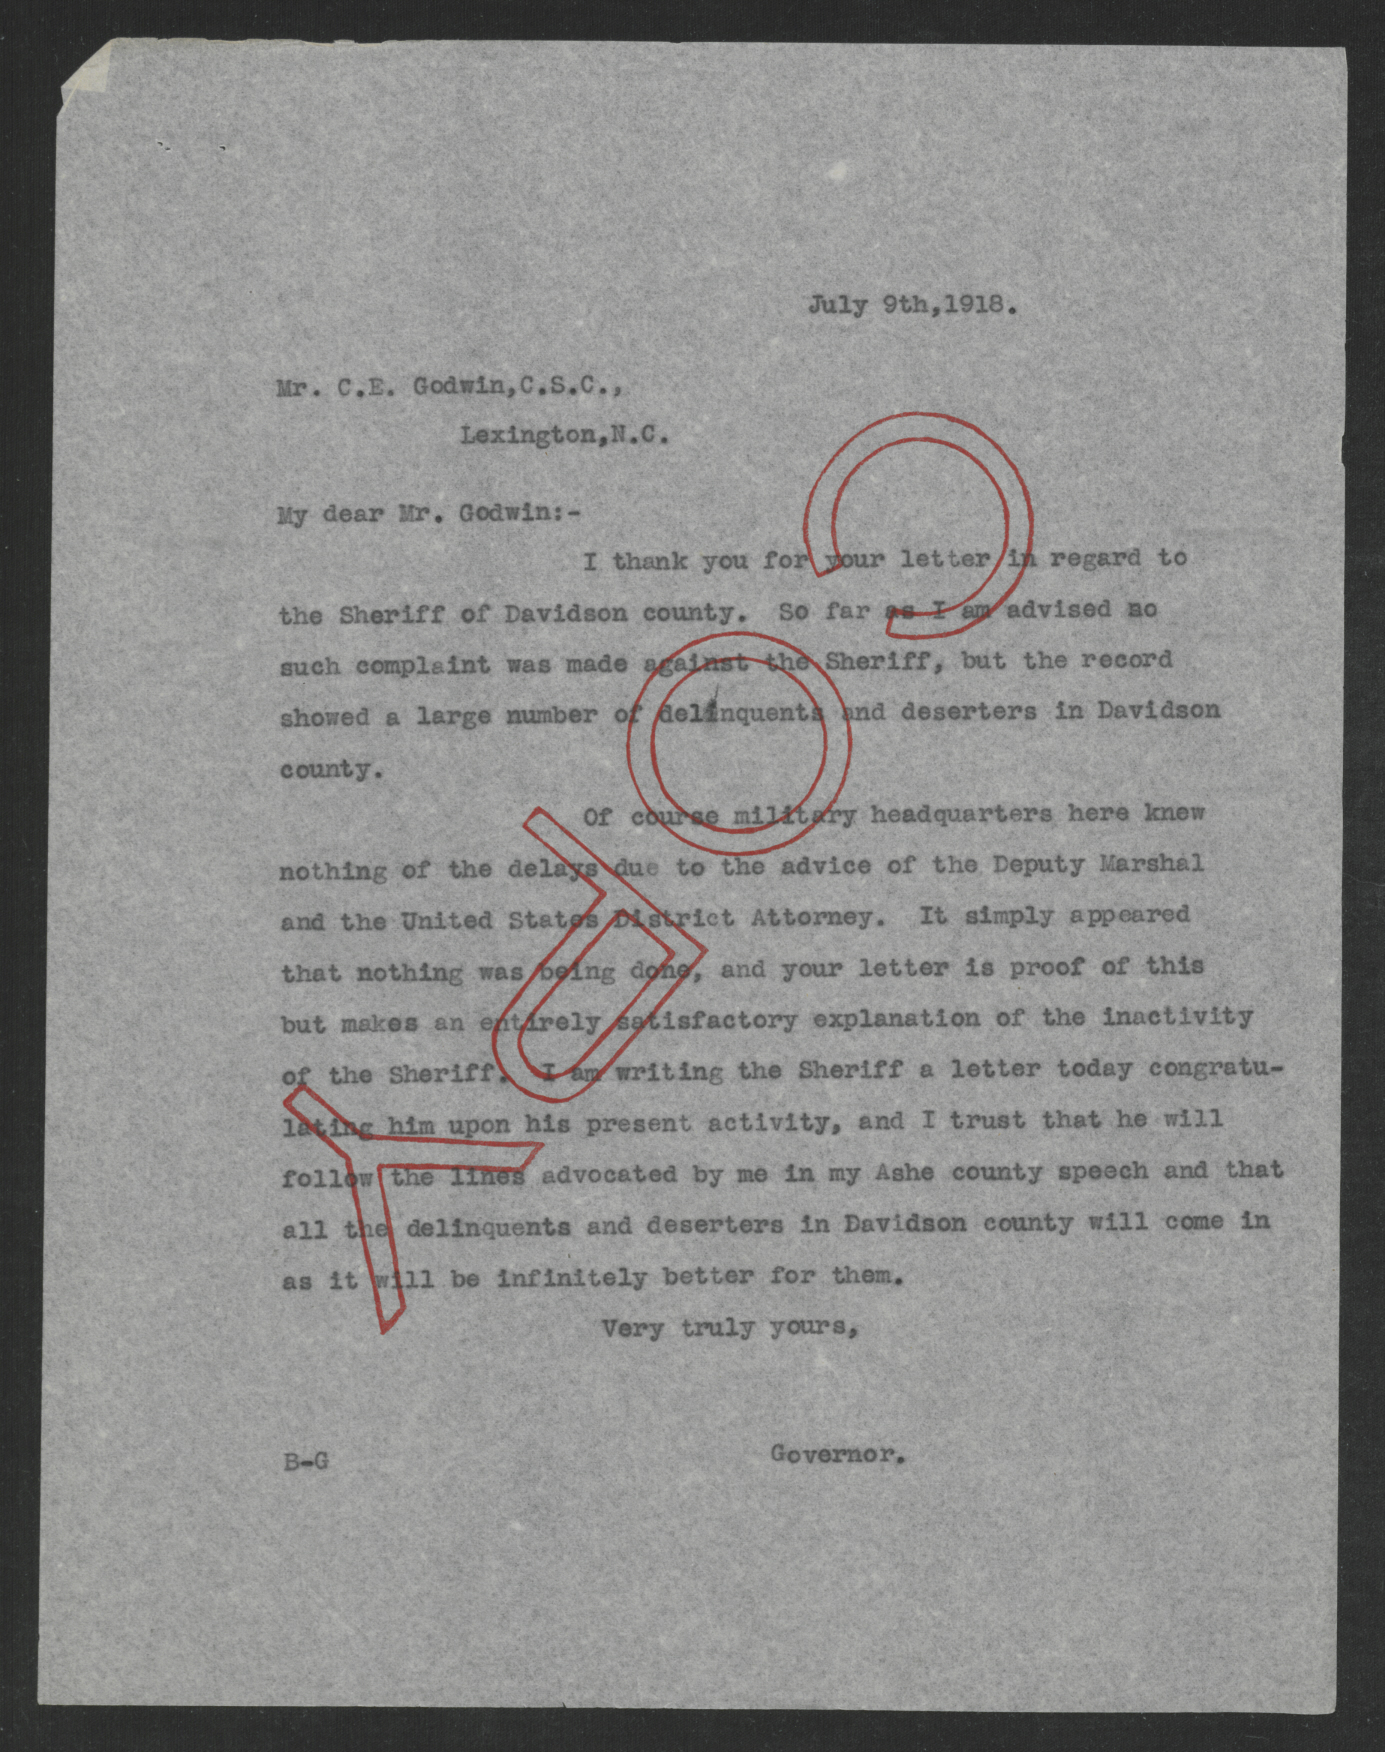 Letter from Thomas W. Bickett to Charles E. Godwin, July 9, 1918